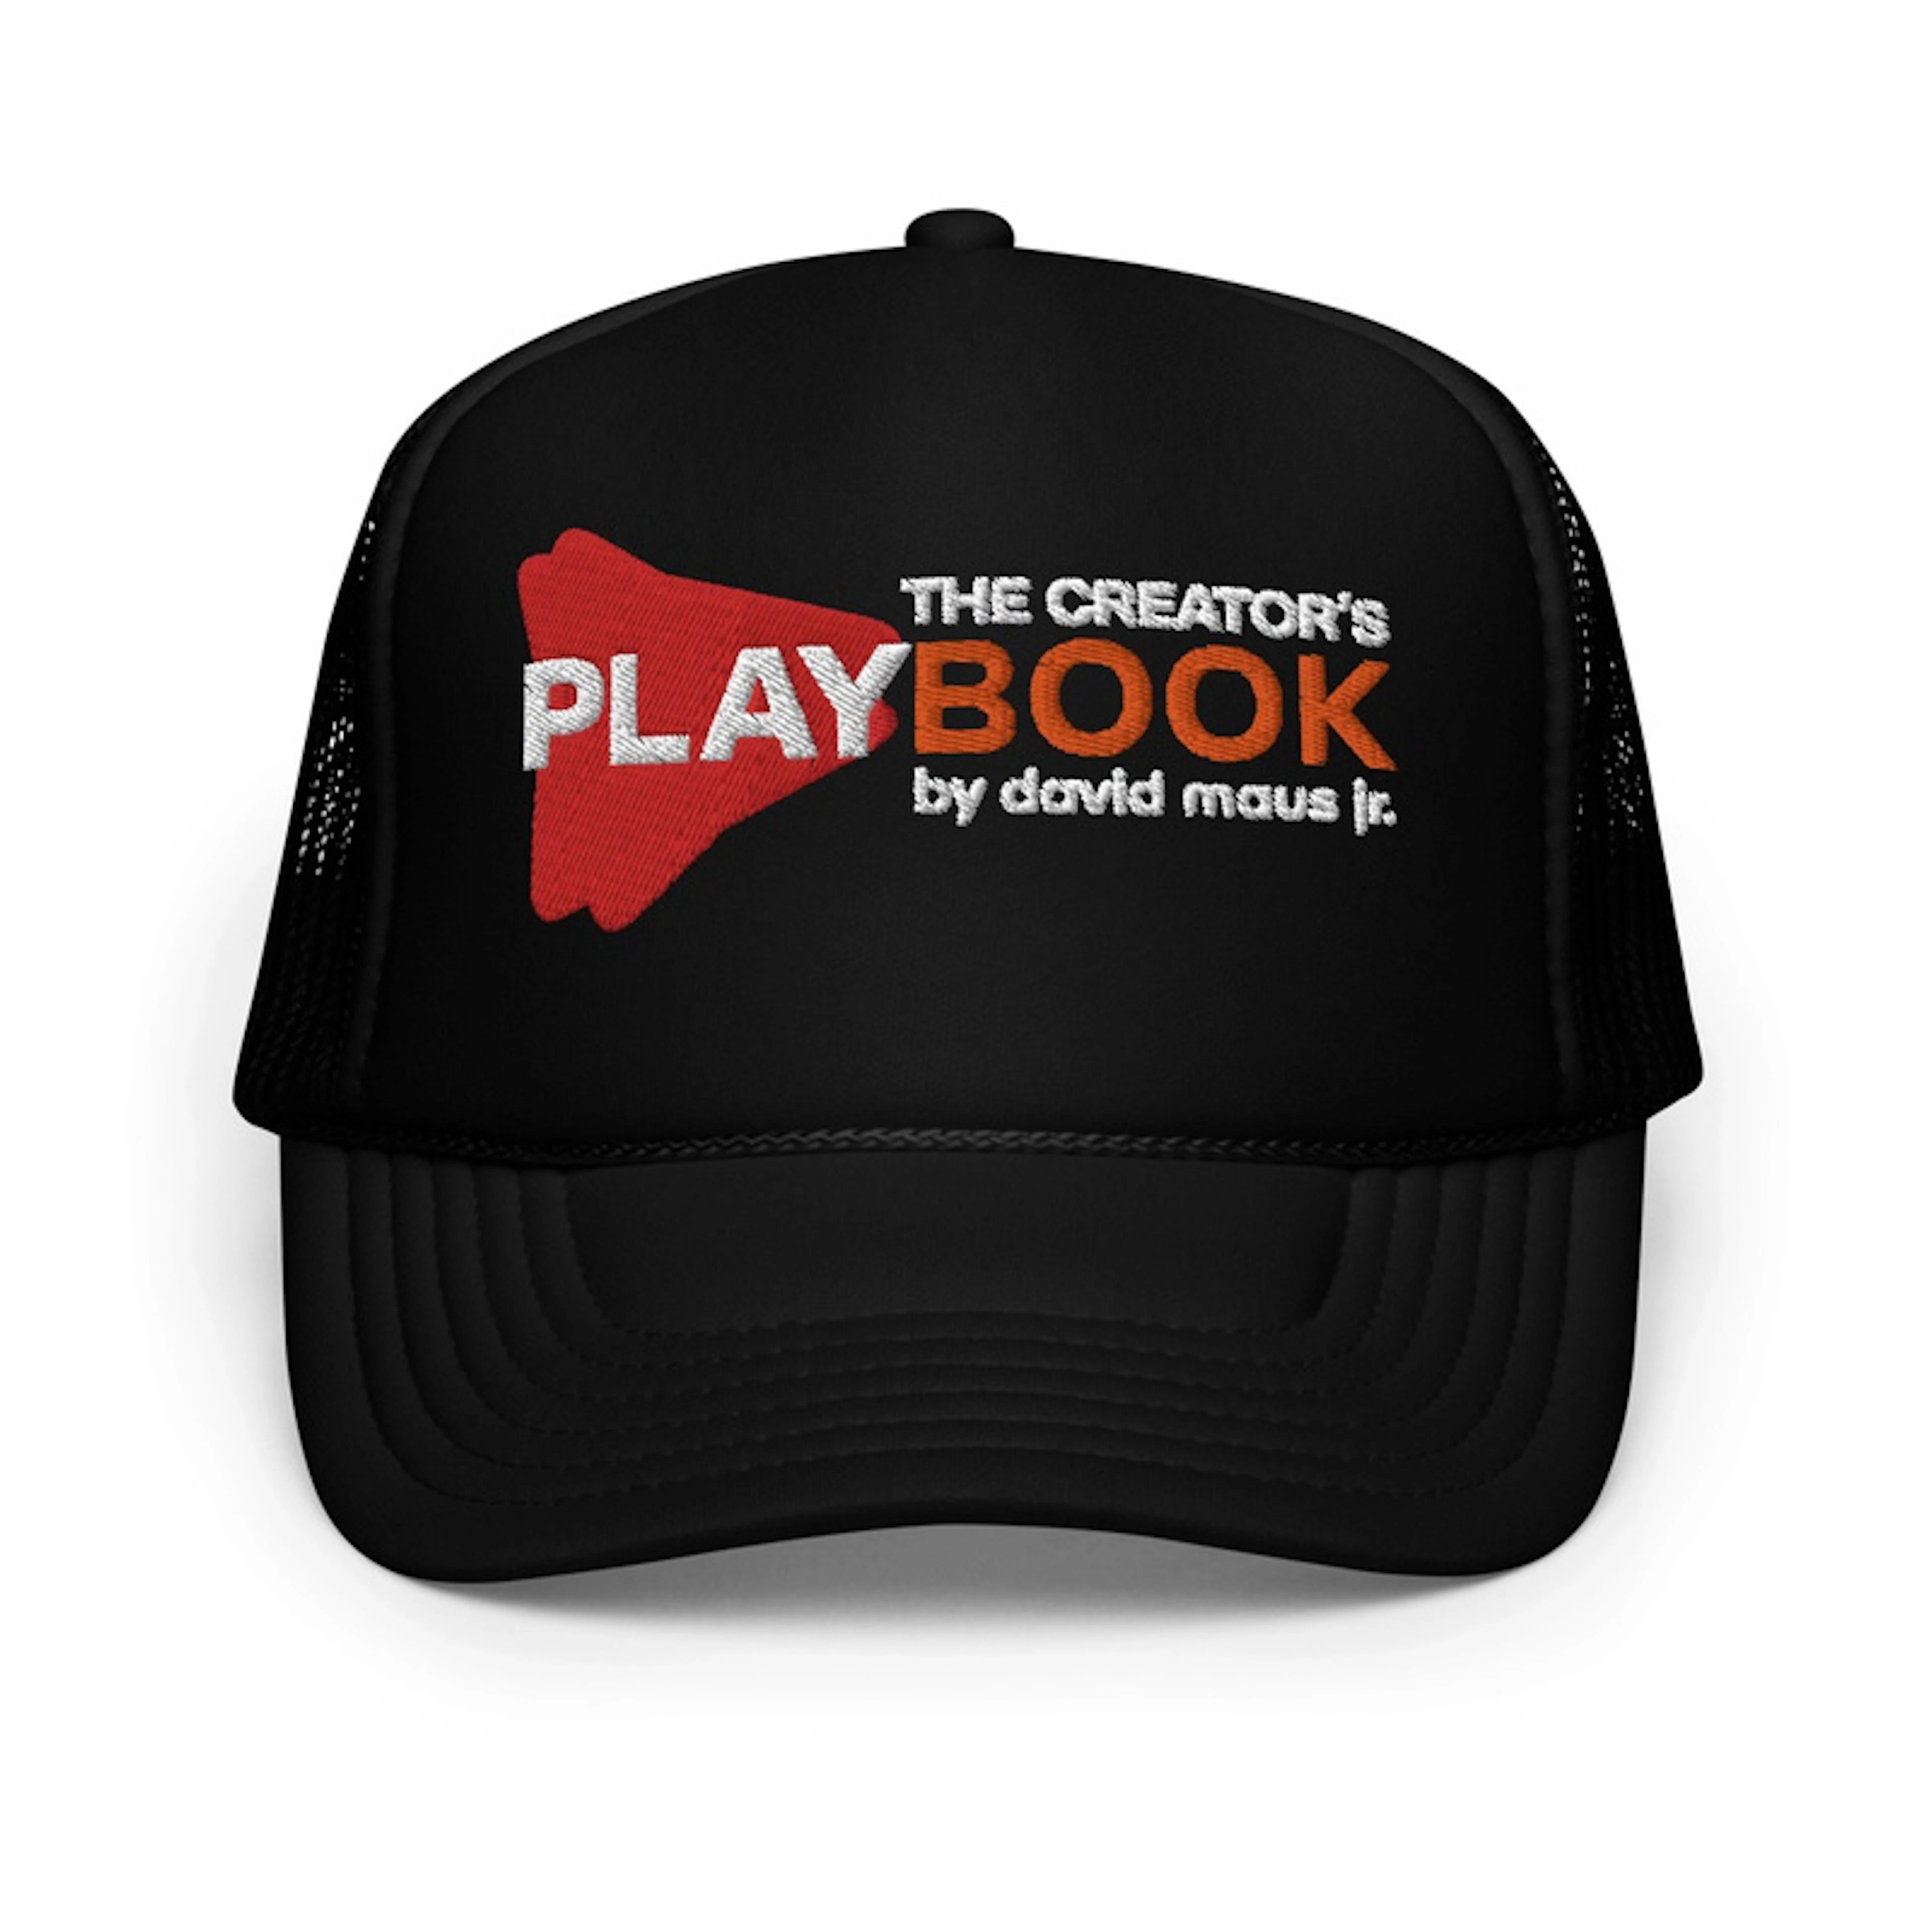 The Playbook HAT